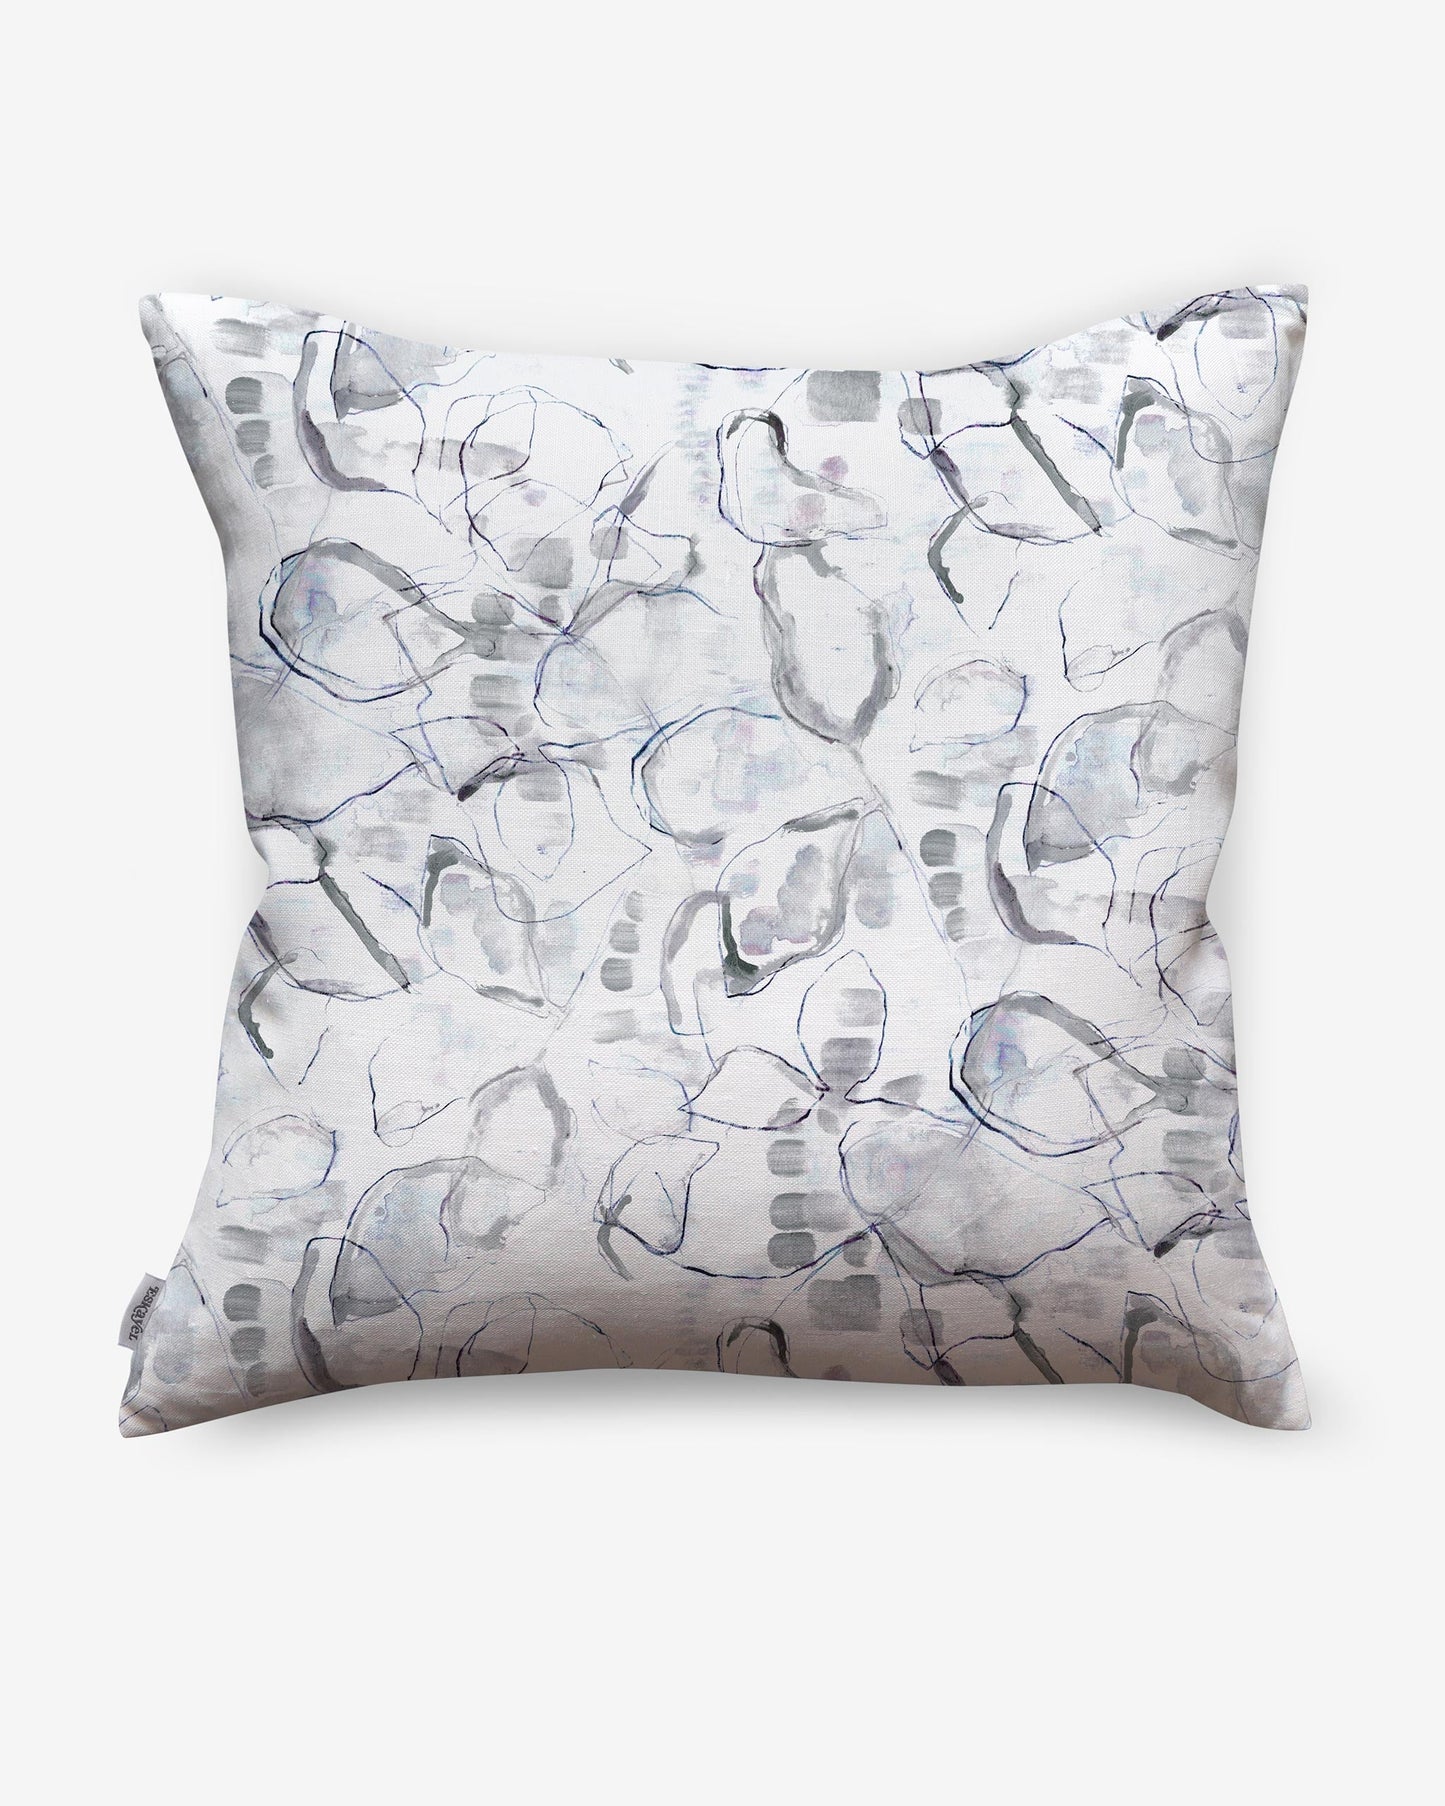 A Canopy Pillow Flint with a luxury fabric and grey and white pattern on it